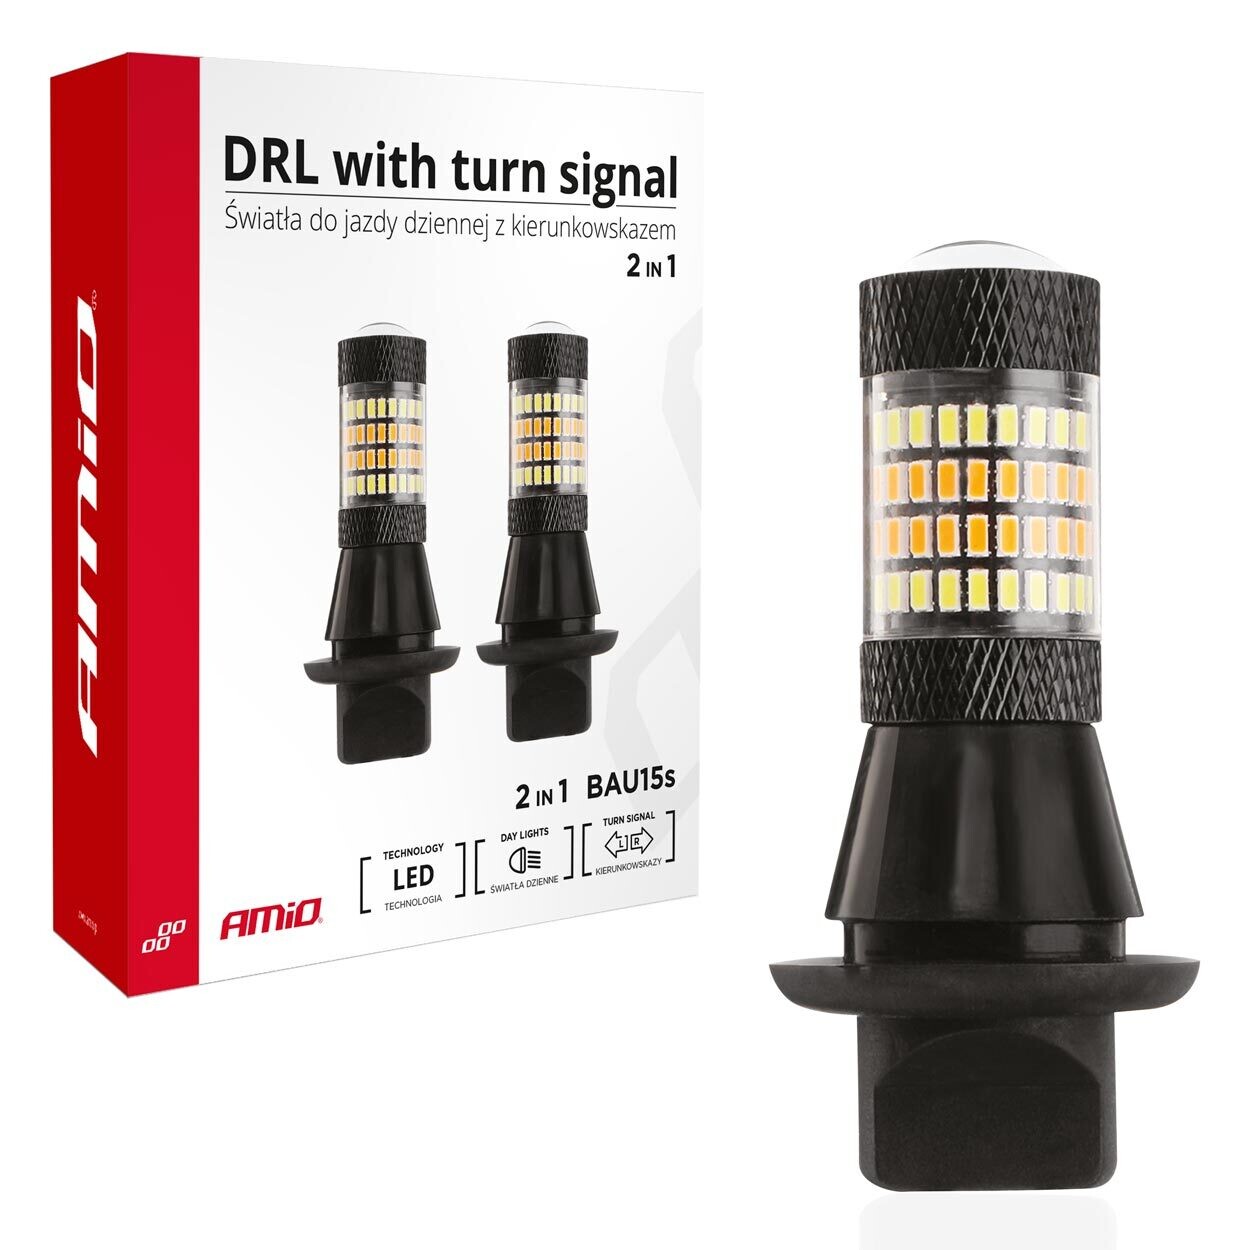 DRL with turn signal 2in1